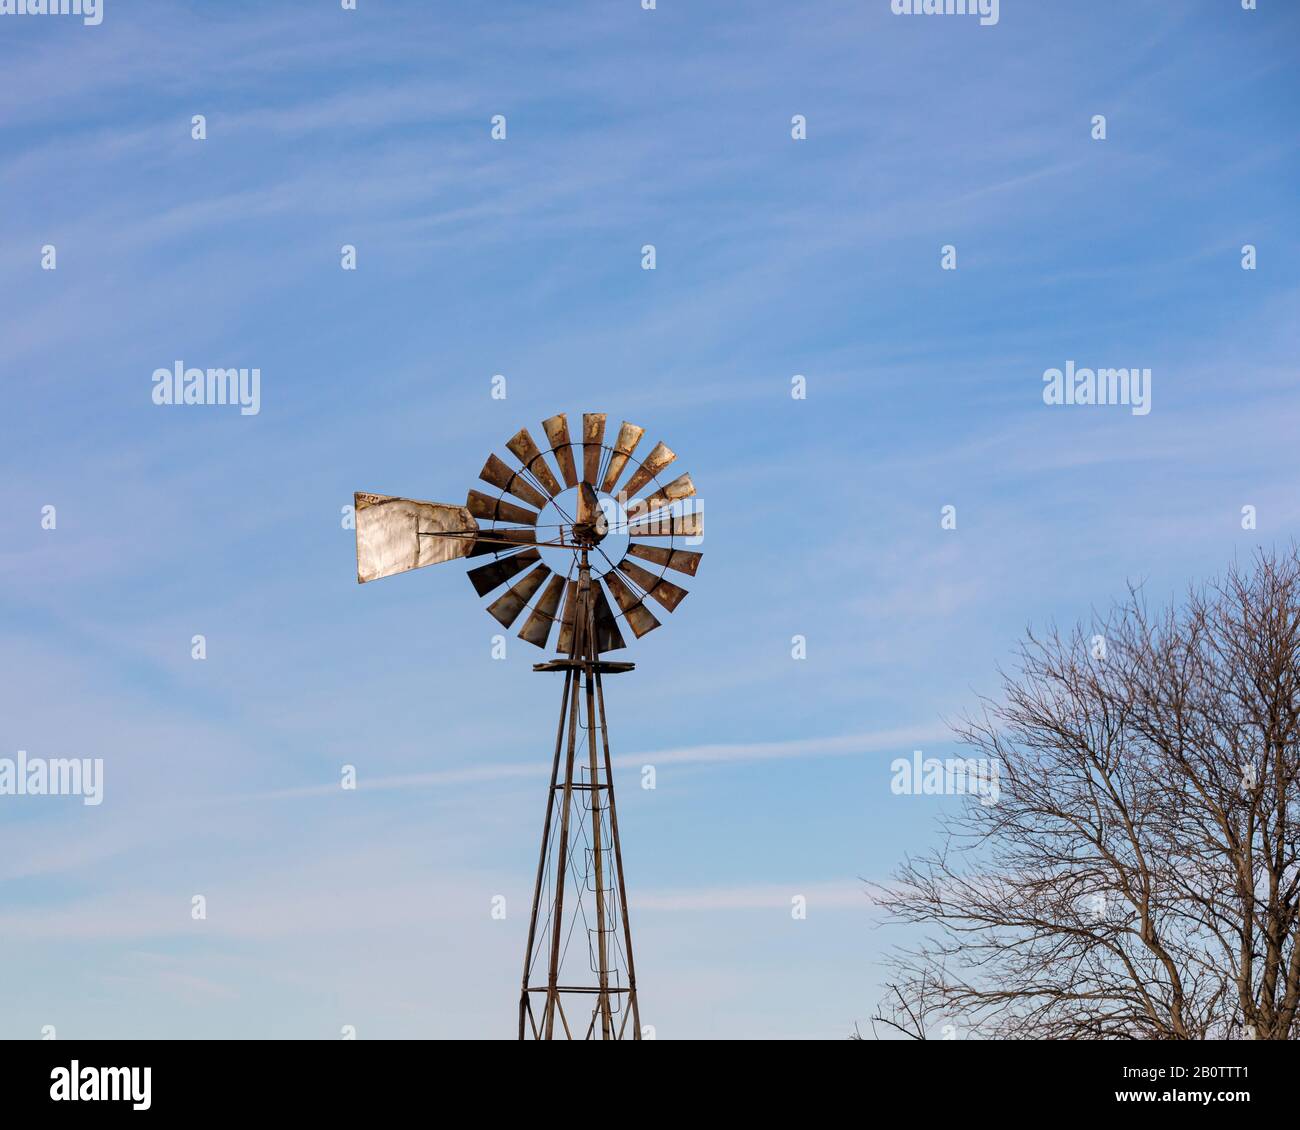 Old, antique windmill, wind pump, with rusty blades, vanes or sails on Midwest farm Stock Photo